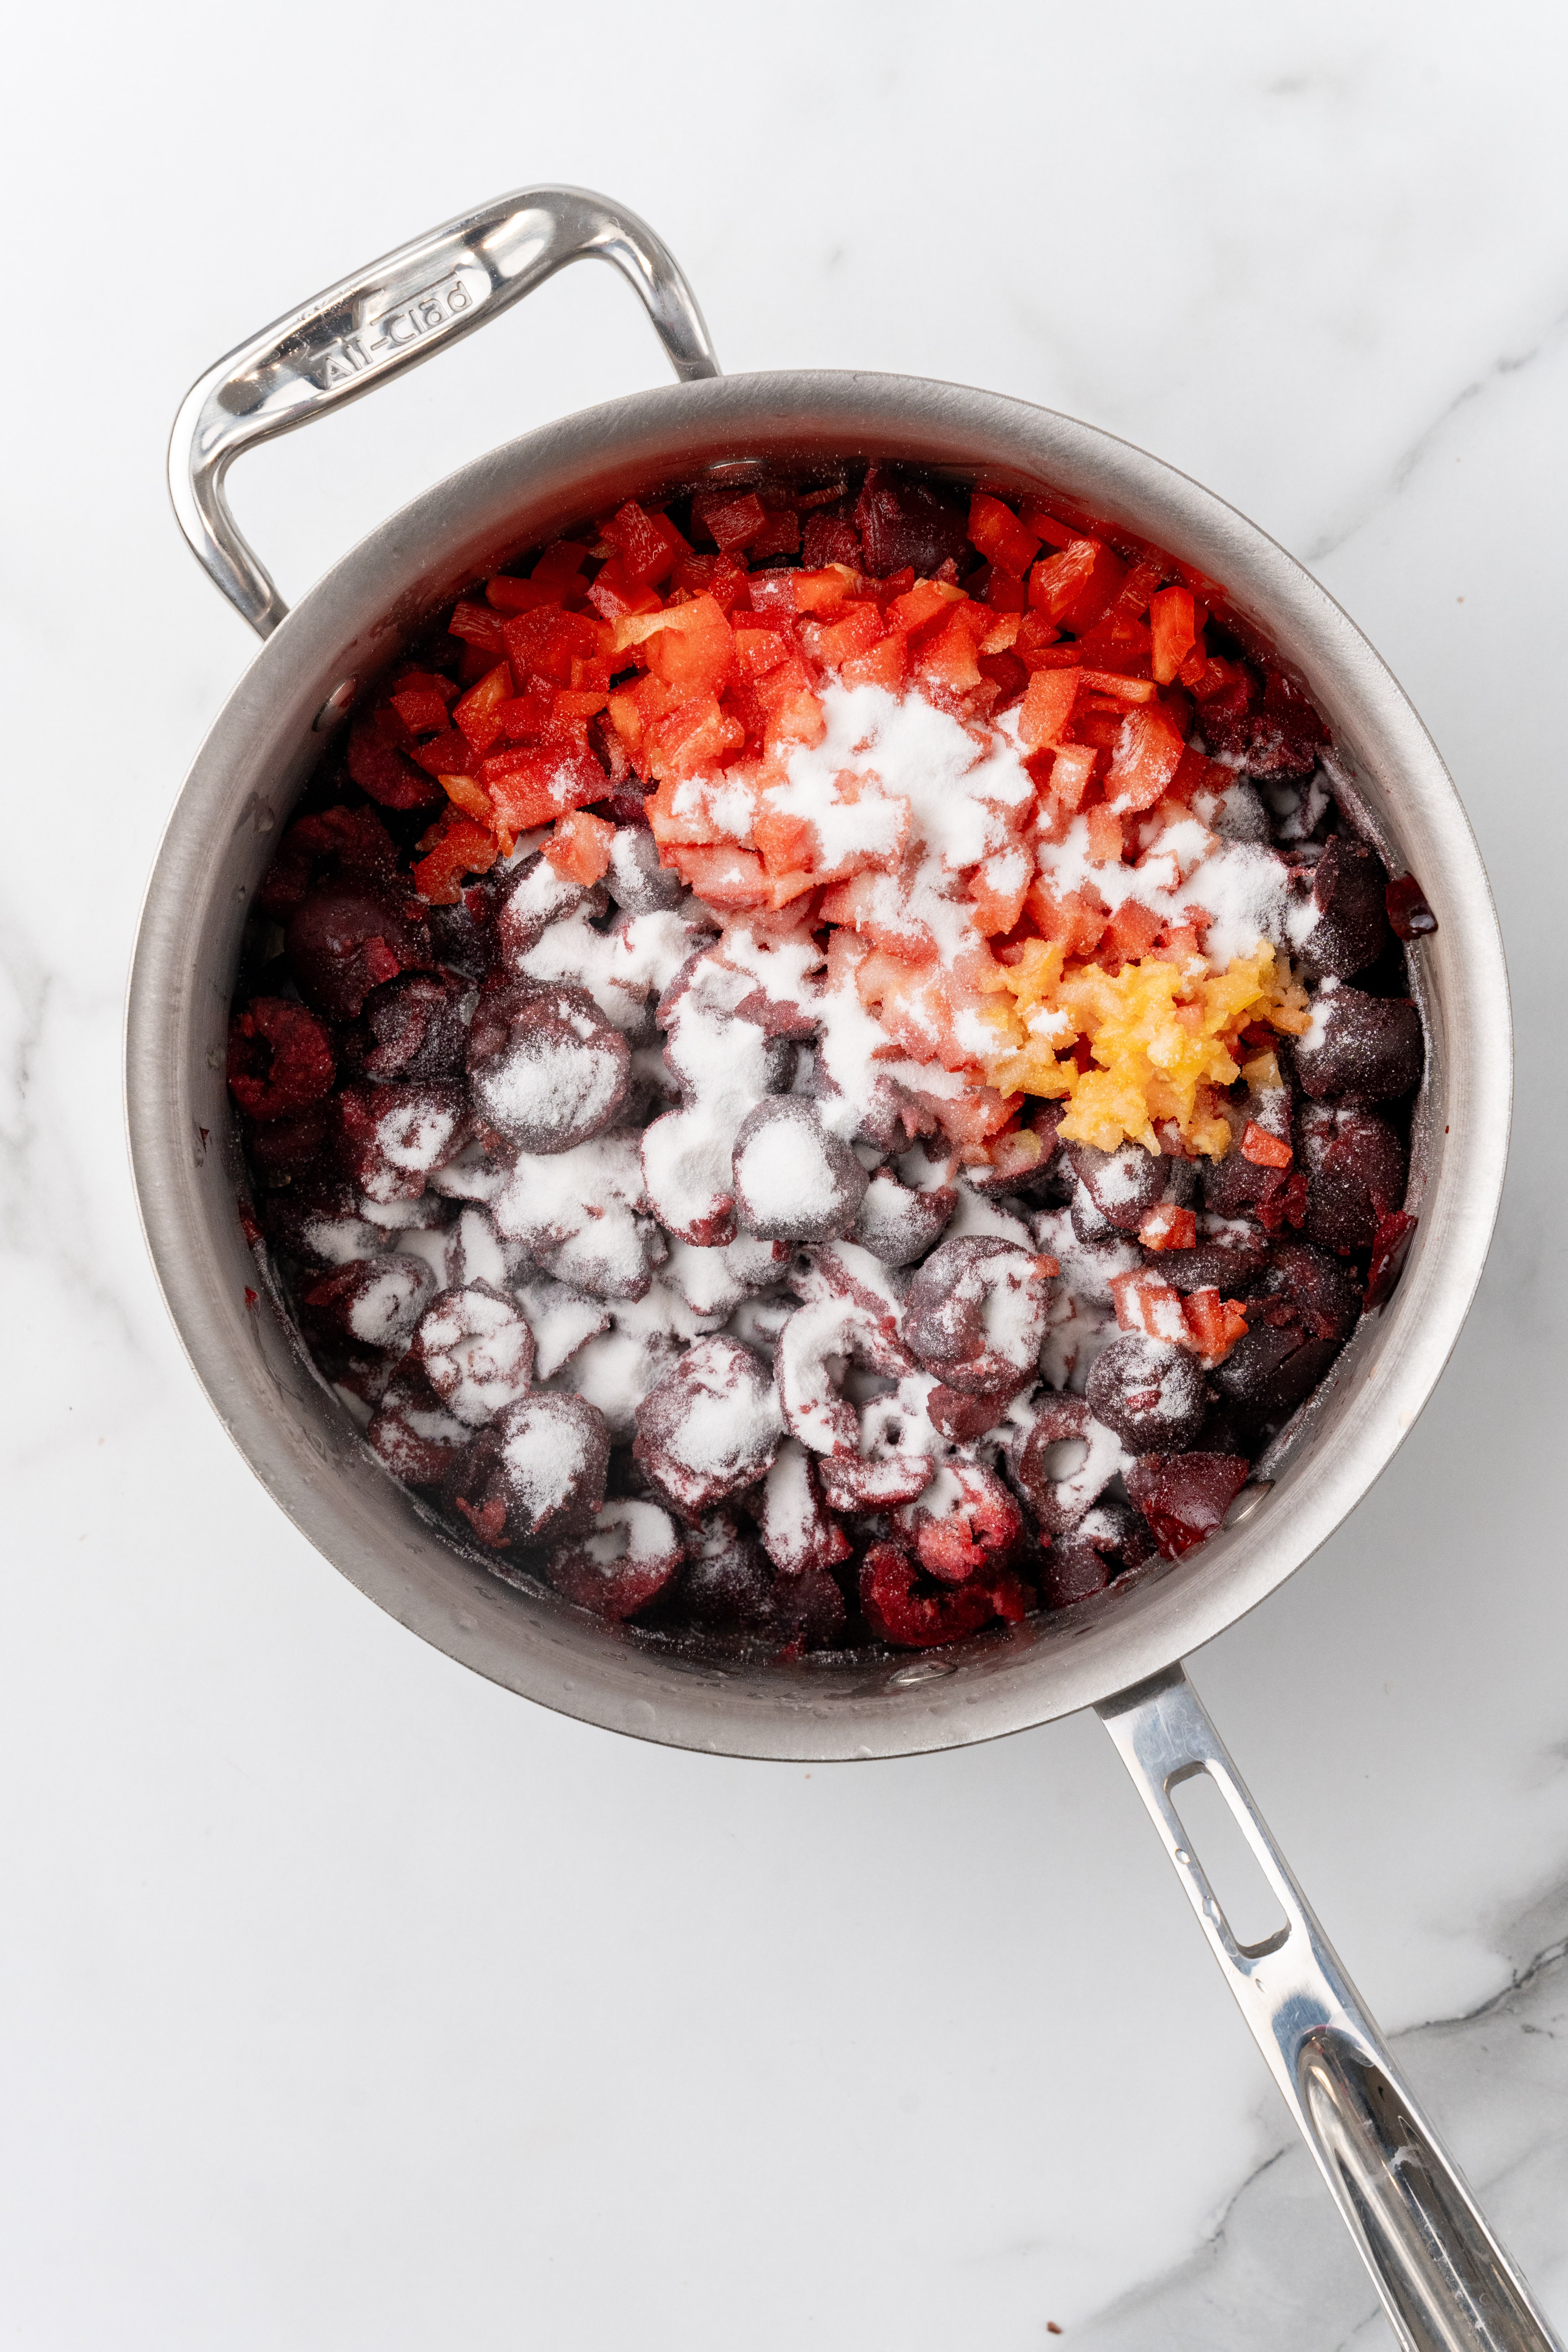 chopped cherries, onions, and peppers in a small metal pot